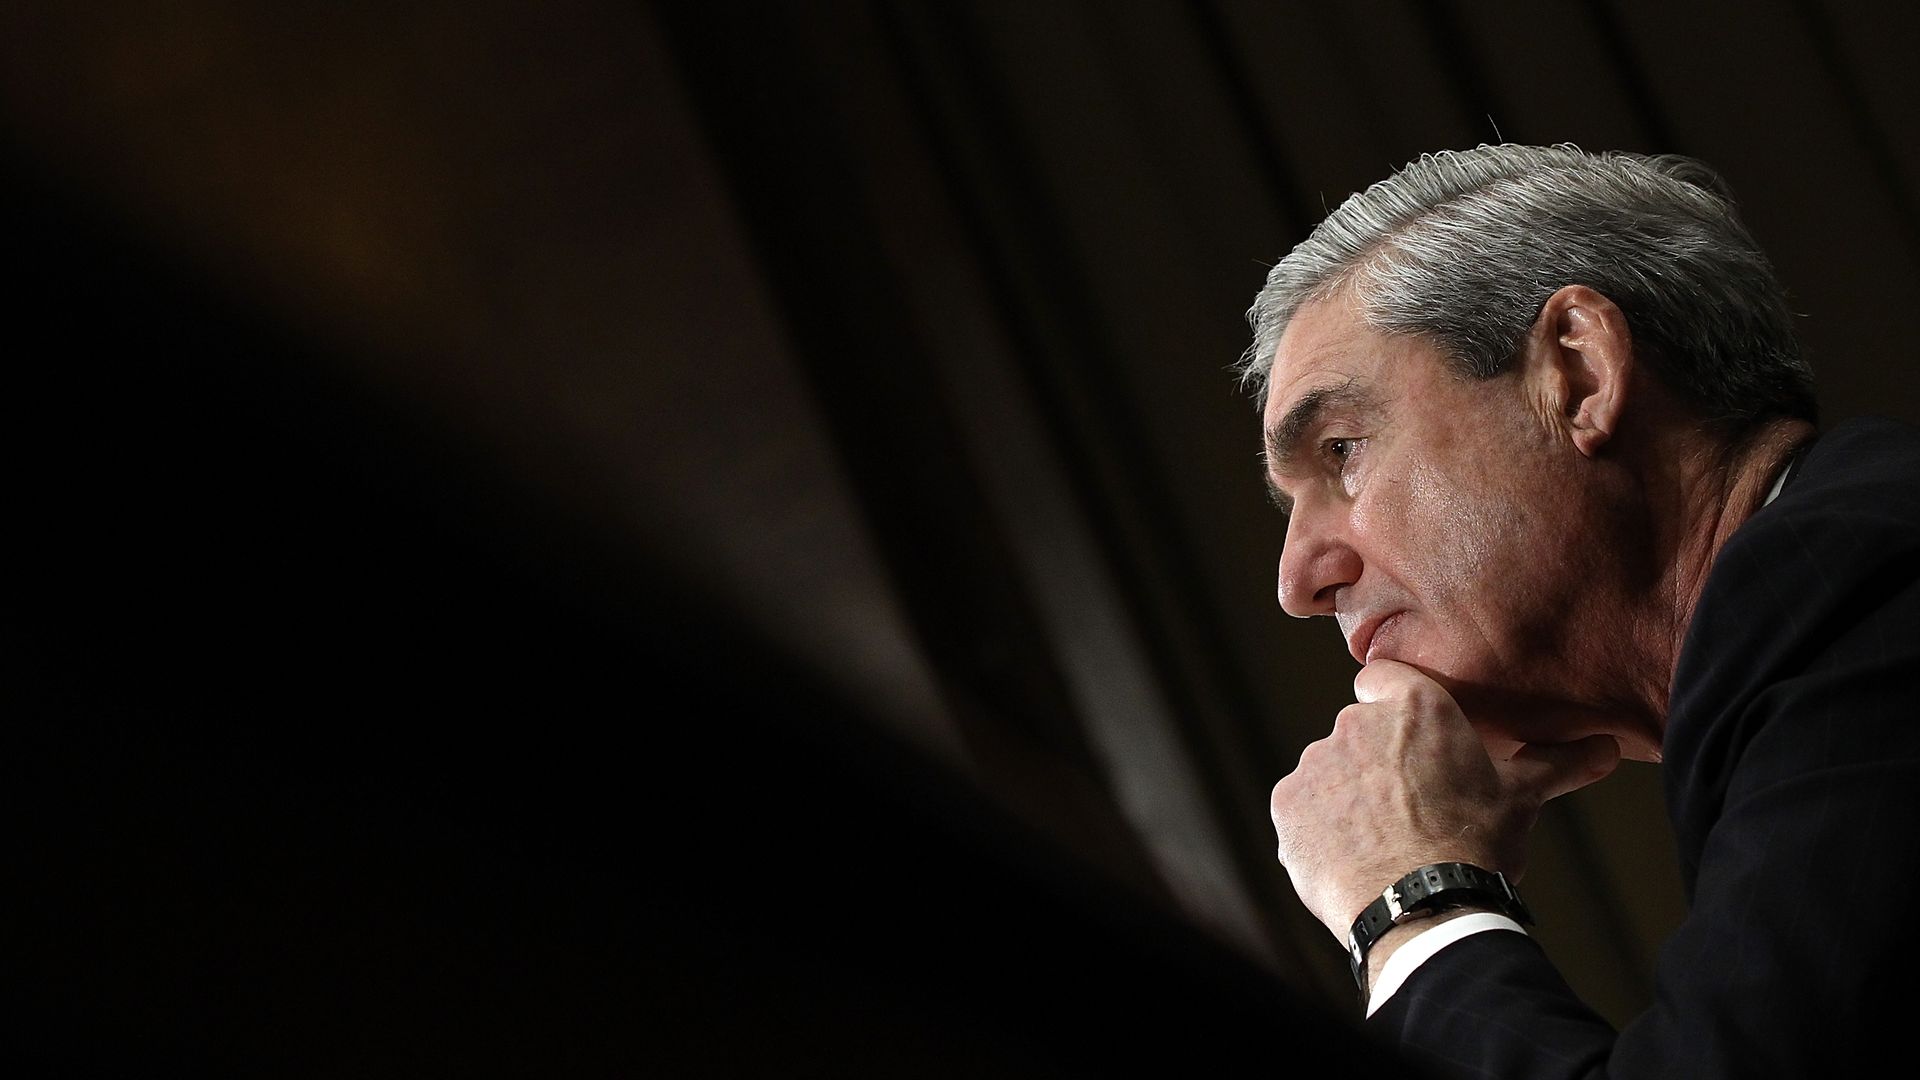 In this image, Robert Mueller looks to the left while resting his chin on his hand. 